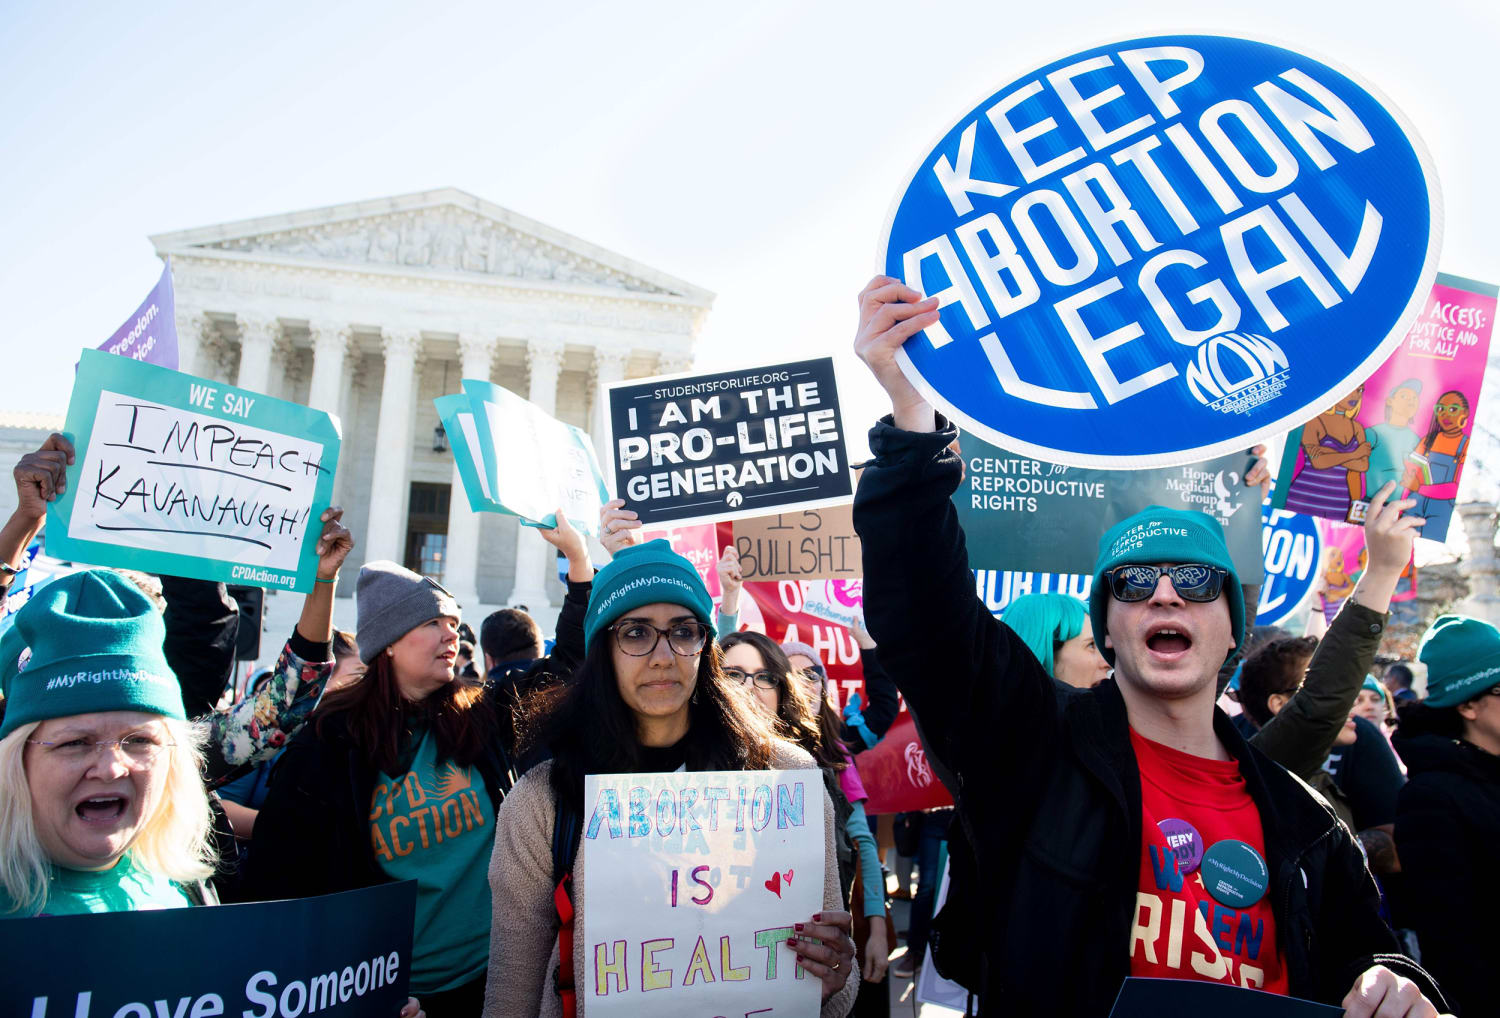 Abortion in Louisiana is illegal immediately after Supreme Court